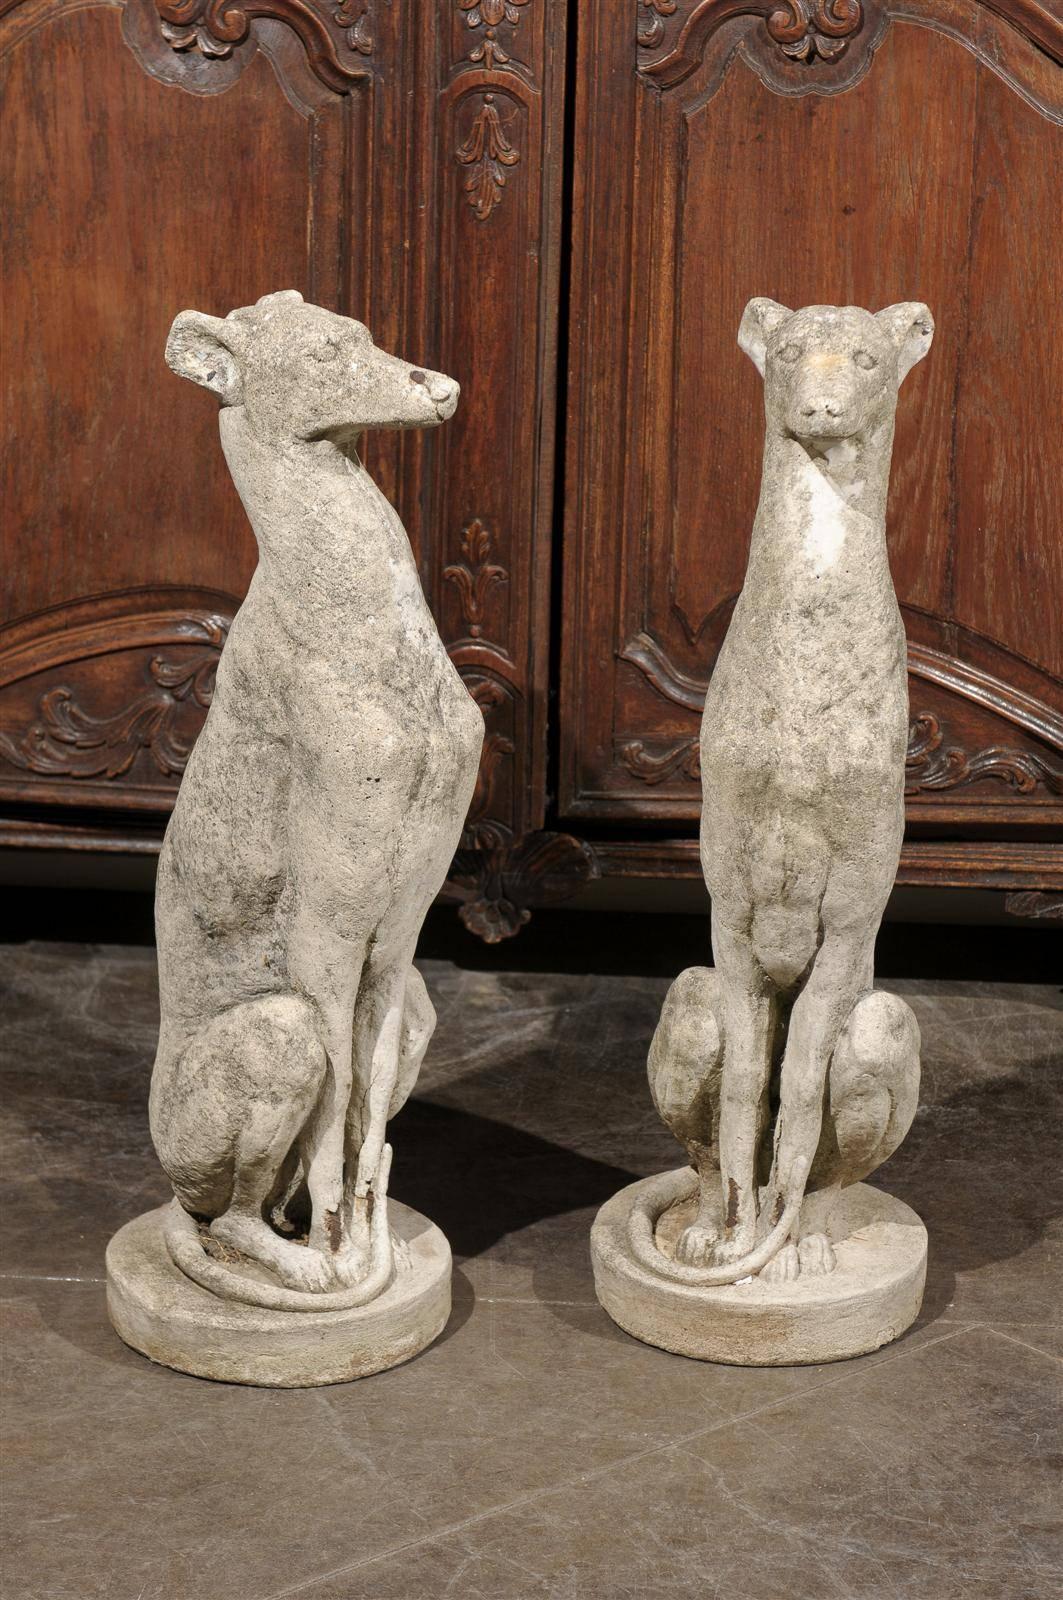 This pair of vintage carved cement greyhounds from the 20th century depicts the dogs seating in a particularly attentive position. Sitting very straight, the loyal companions are looking straight ahead. Their front paws and tails neatly tucked, each